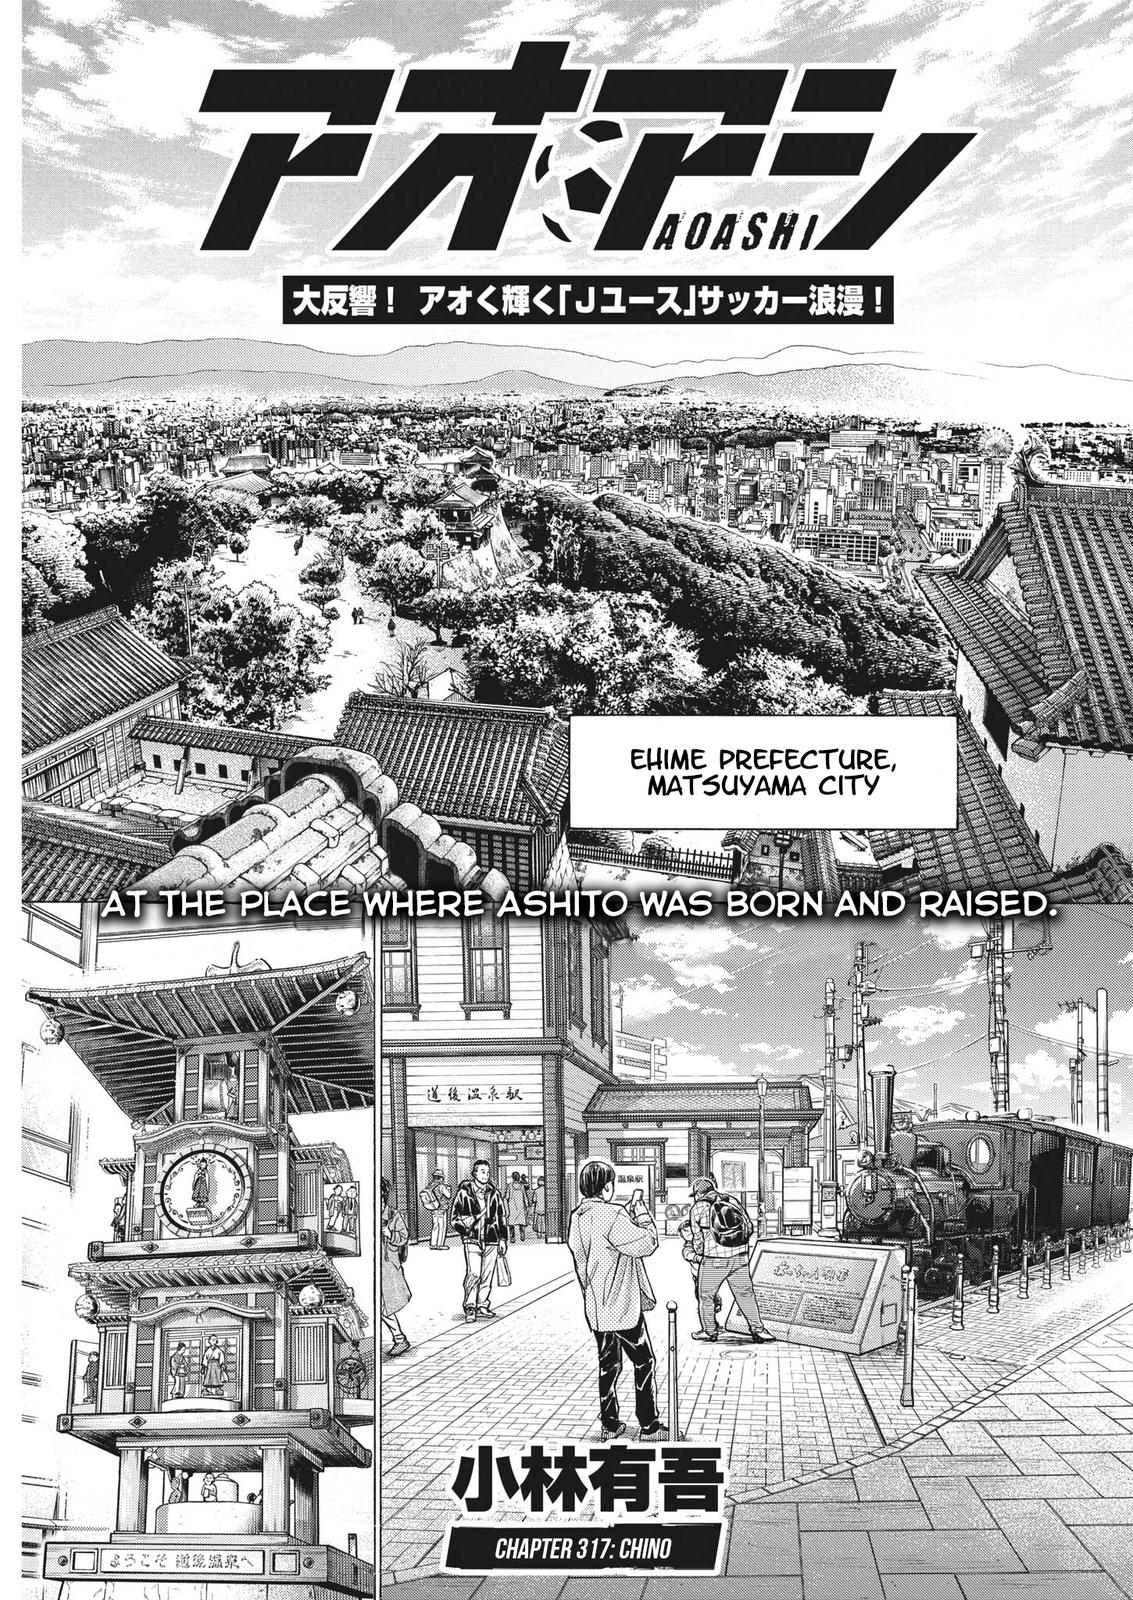 Ao Ashi, Chapter 313  TcbScans Org - Free Manga Online in High Quality